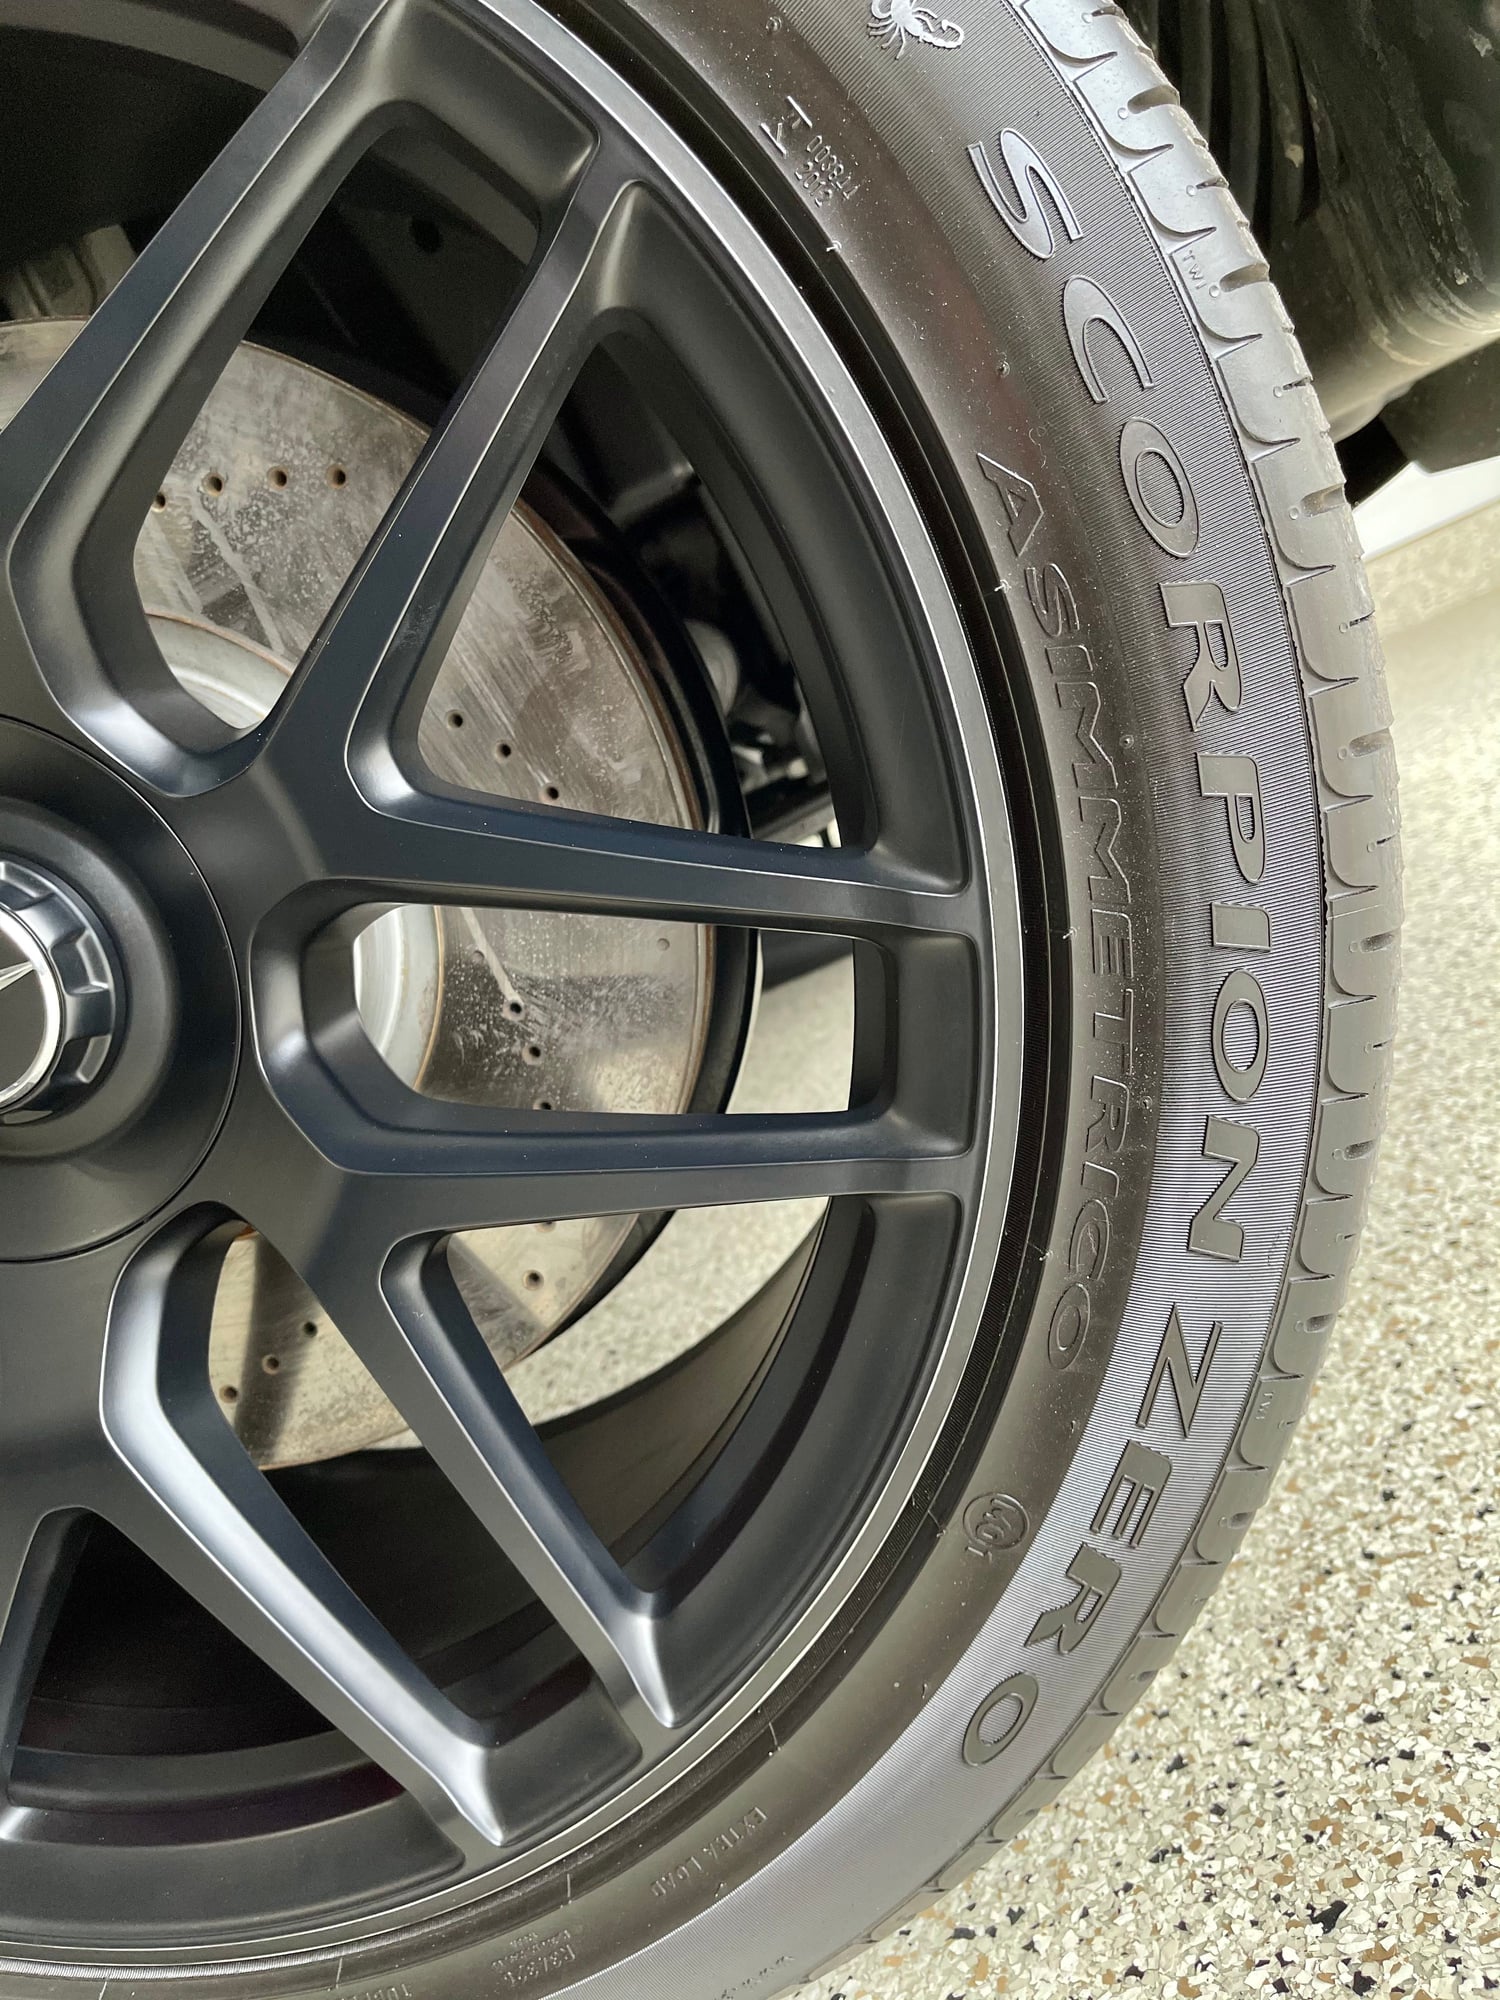 Wheels and Tires/Axles - 2020 Mercedes Benz G63 OEM 22” AMG Cross Spoked Wheel Set w/OEM Pirelli Tires - Used - 2013 to 2020 Mercedes-Benz G63 AMG - Jacksonville, FL 32256, United States